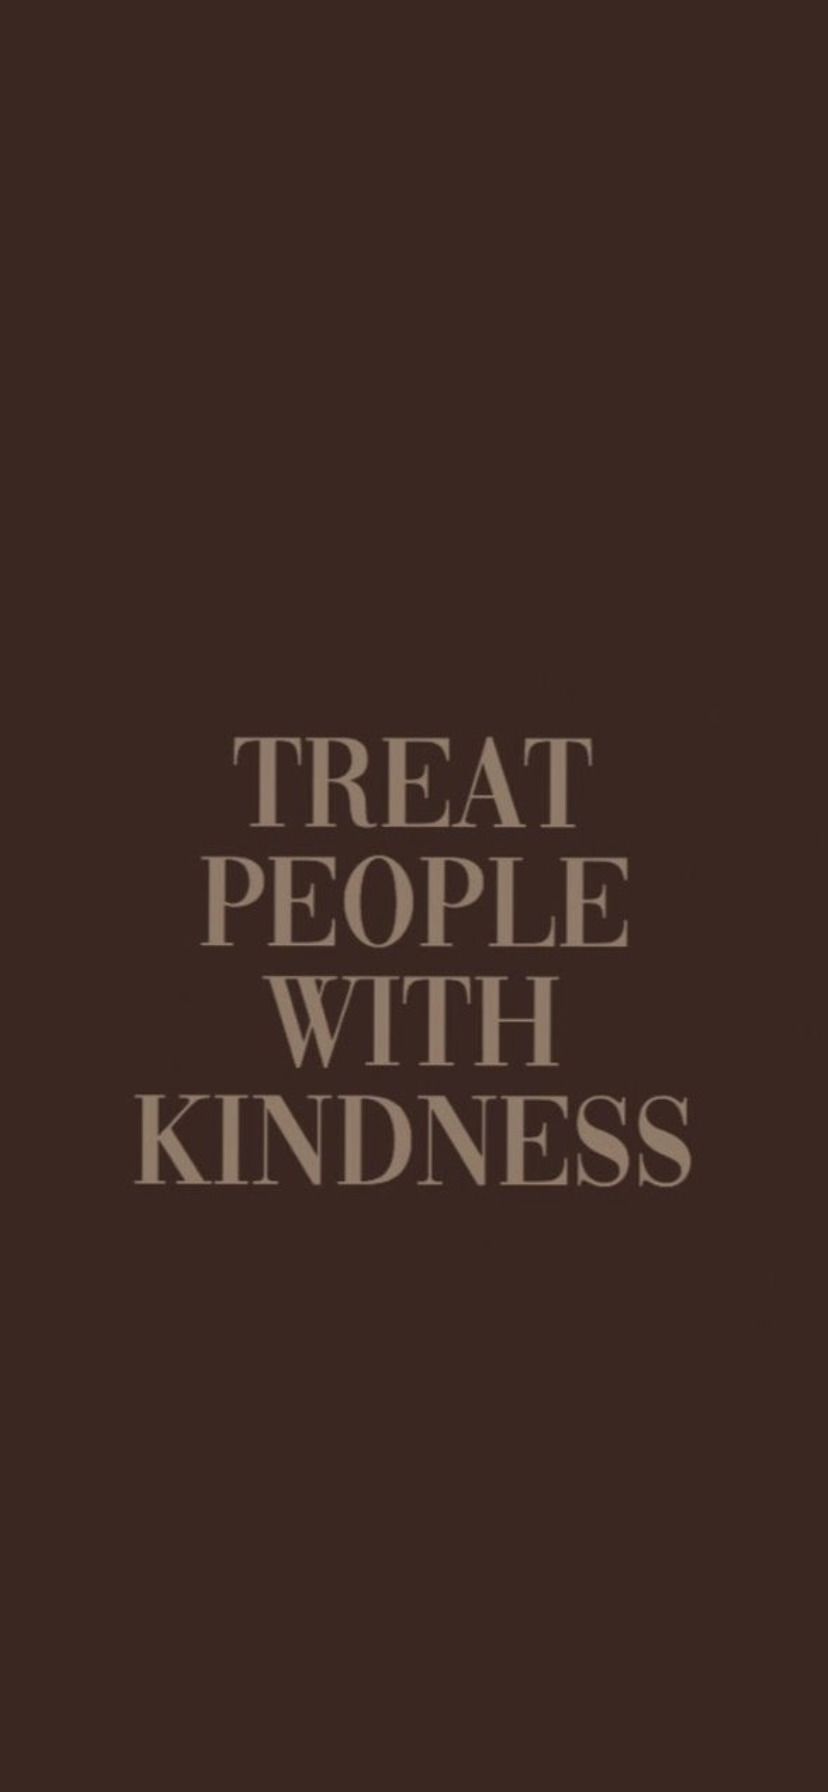 Treat people with kindness - Brown